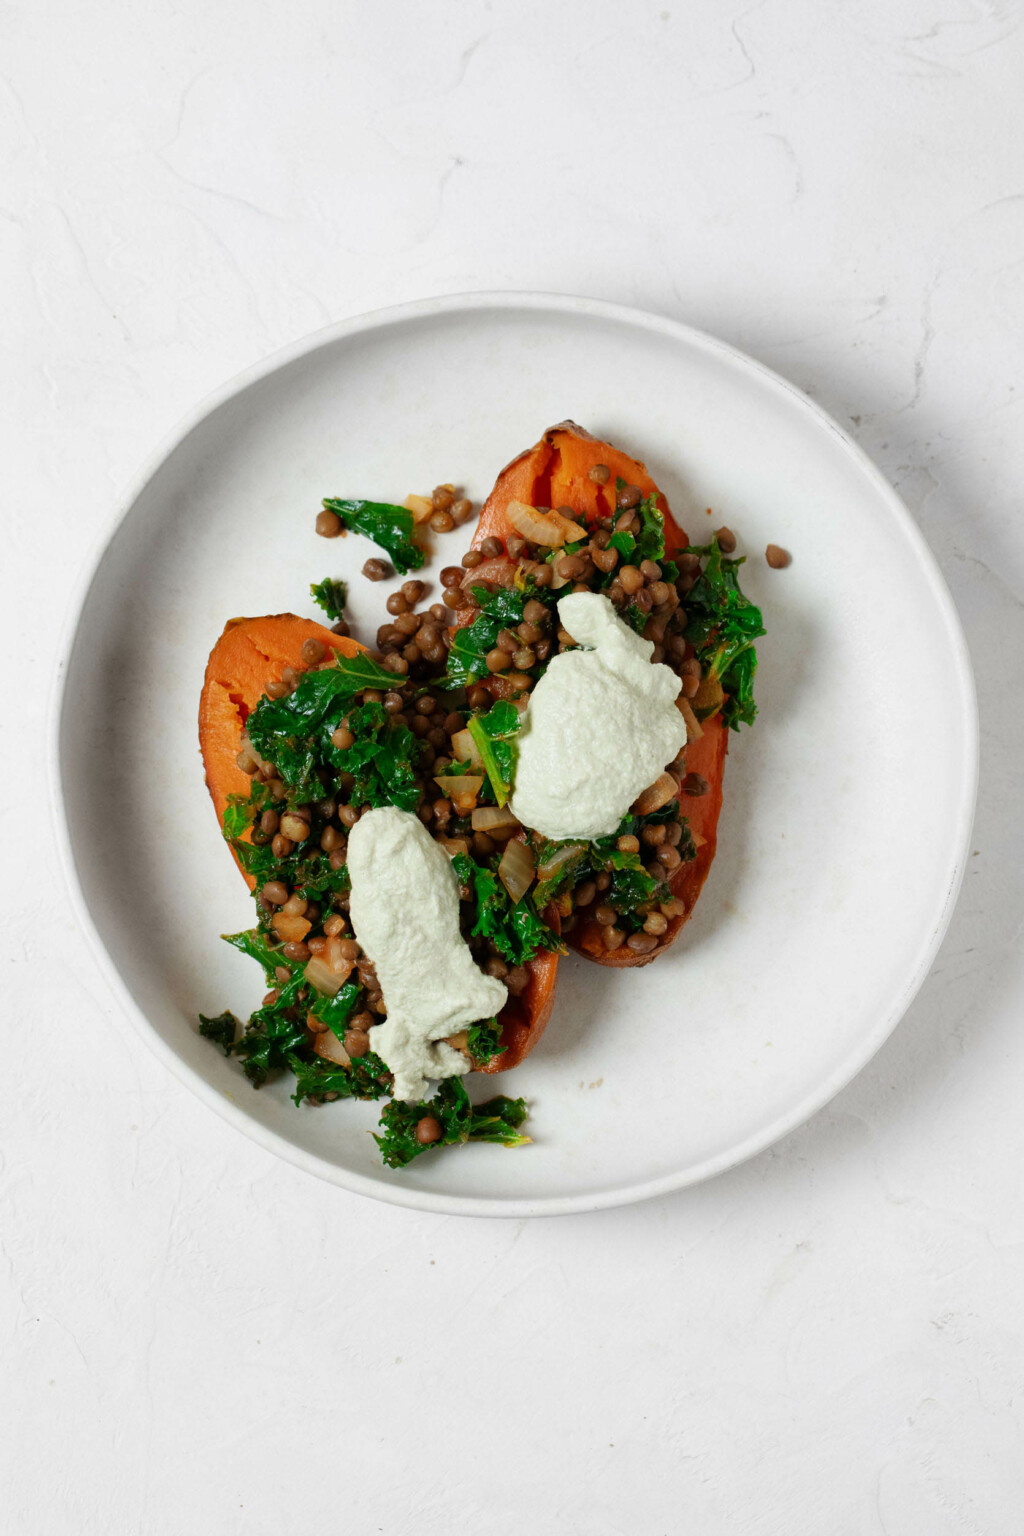 An overhead image of a stuffed sweet potato, which has lentils and bright green kale. It's topped with a pumpkin seed cream.